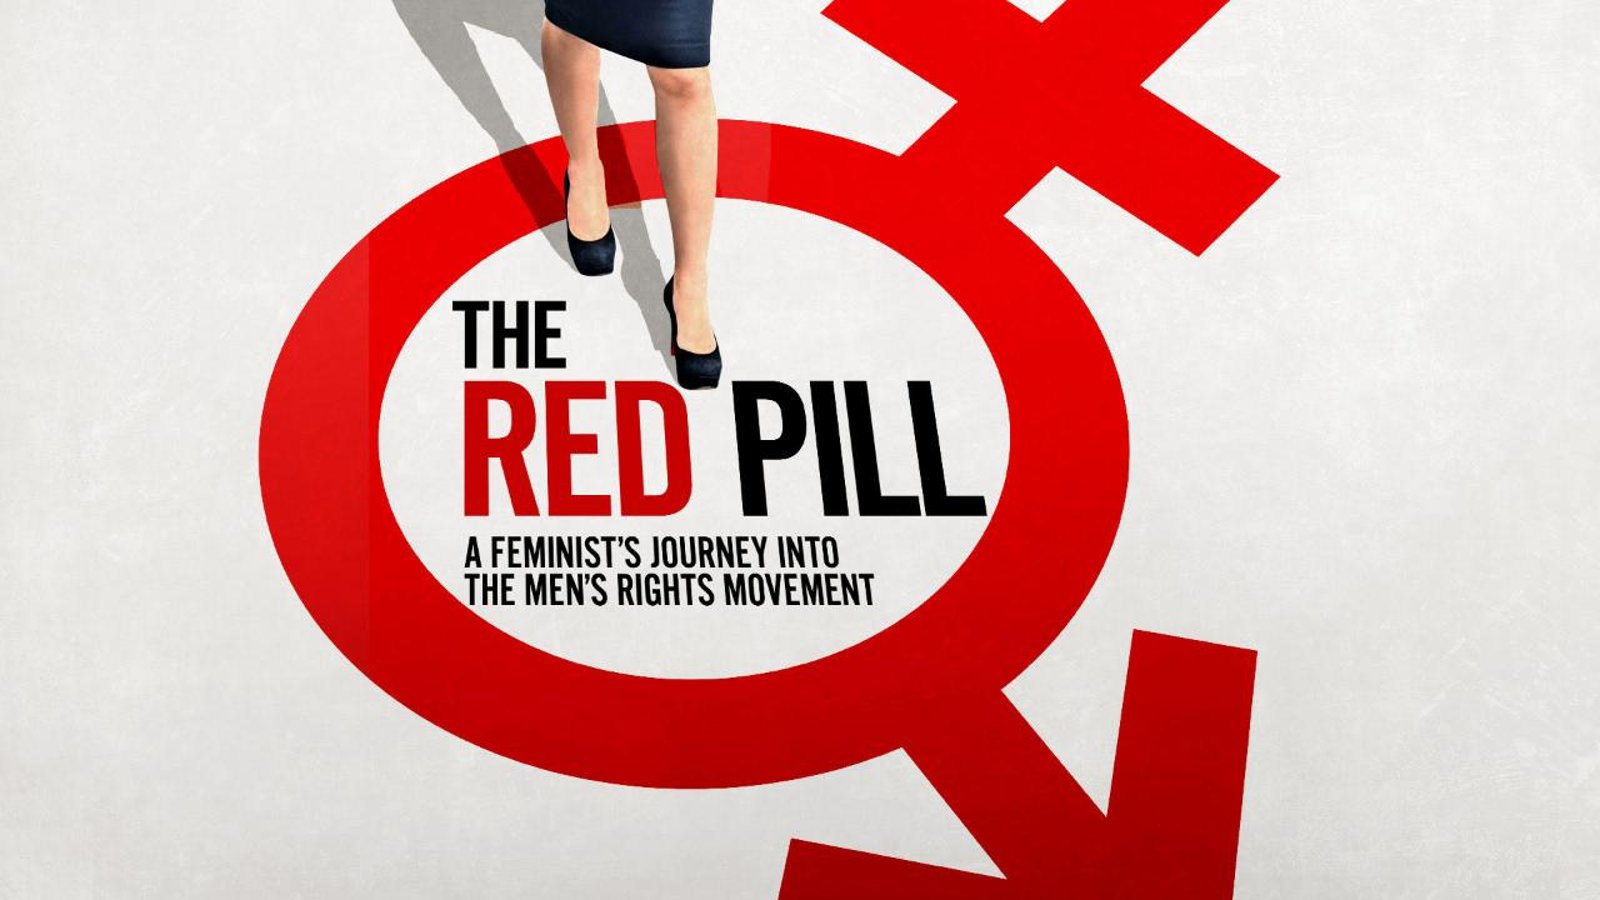 The Red Pill - A Feminist's Journey Into the Men's Rights Movement